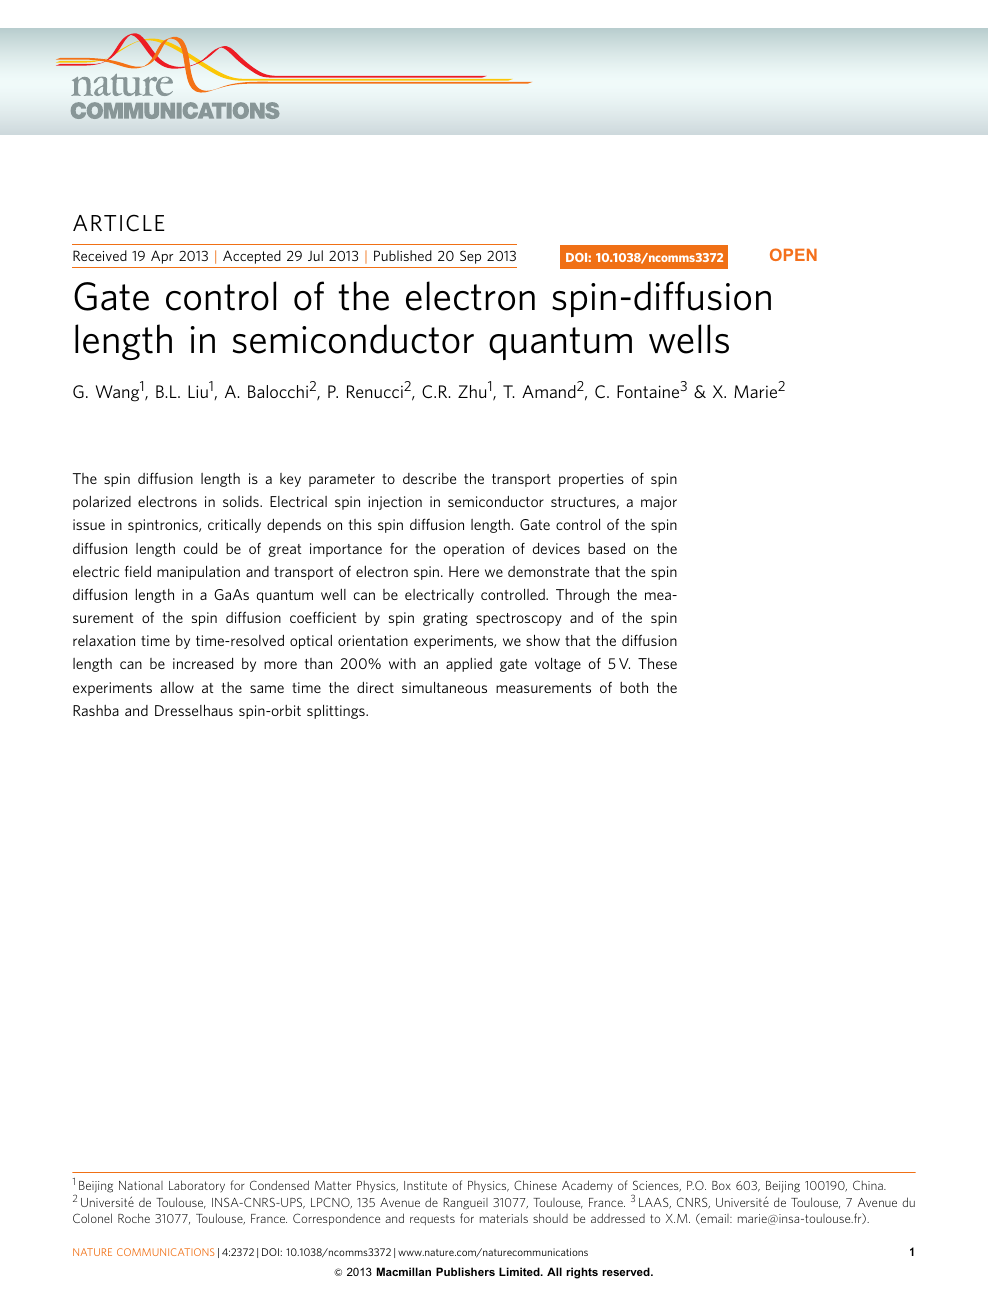 Gate Control Of The Electron Spin Diffusion Length In Semiconductor Quantum Wells Topic Of Research Paper In Nano Technology Download Scholarly Article Pdf And Read For Free On Cyberleninka Open Science Hub